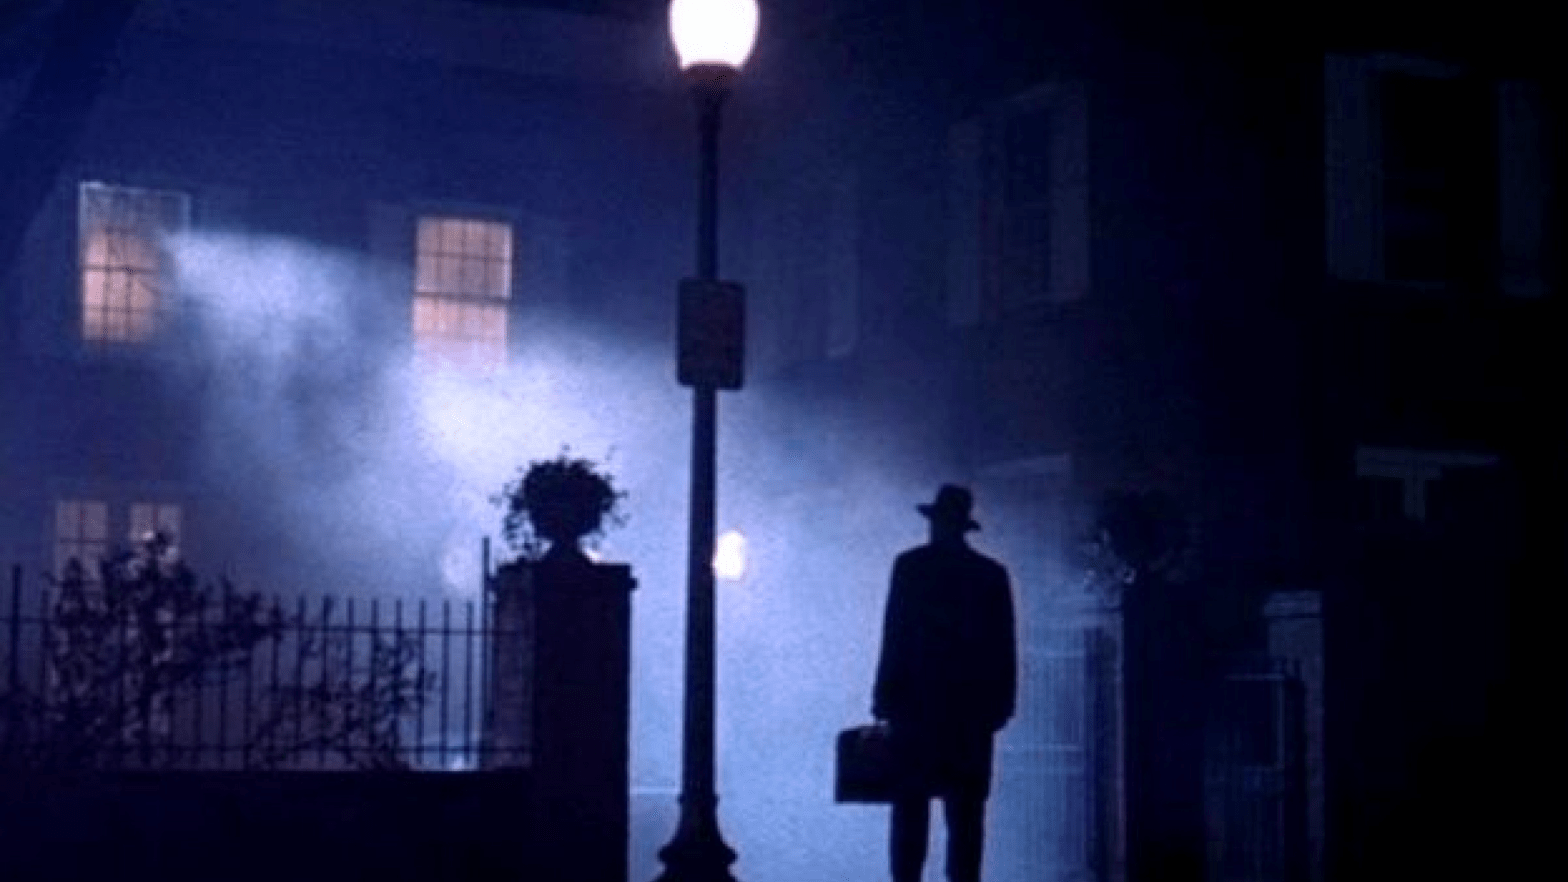 The exorcist arriving to do his job. (Screenshot: Warner Bros.)